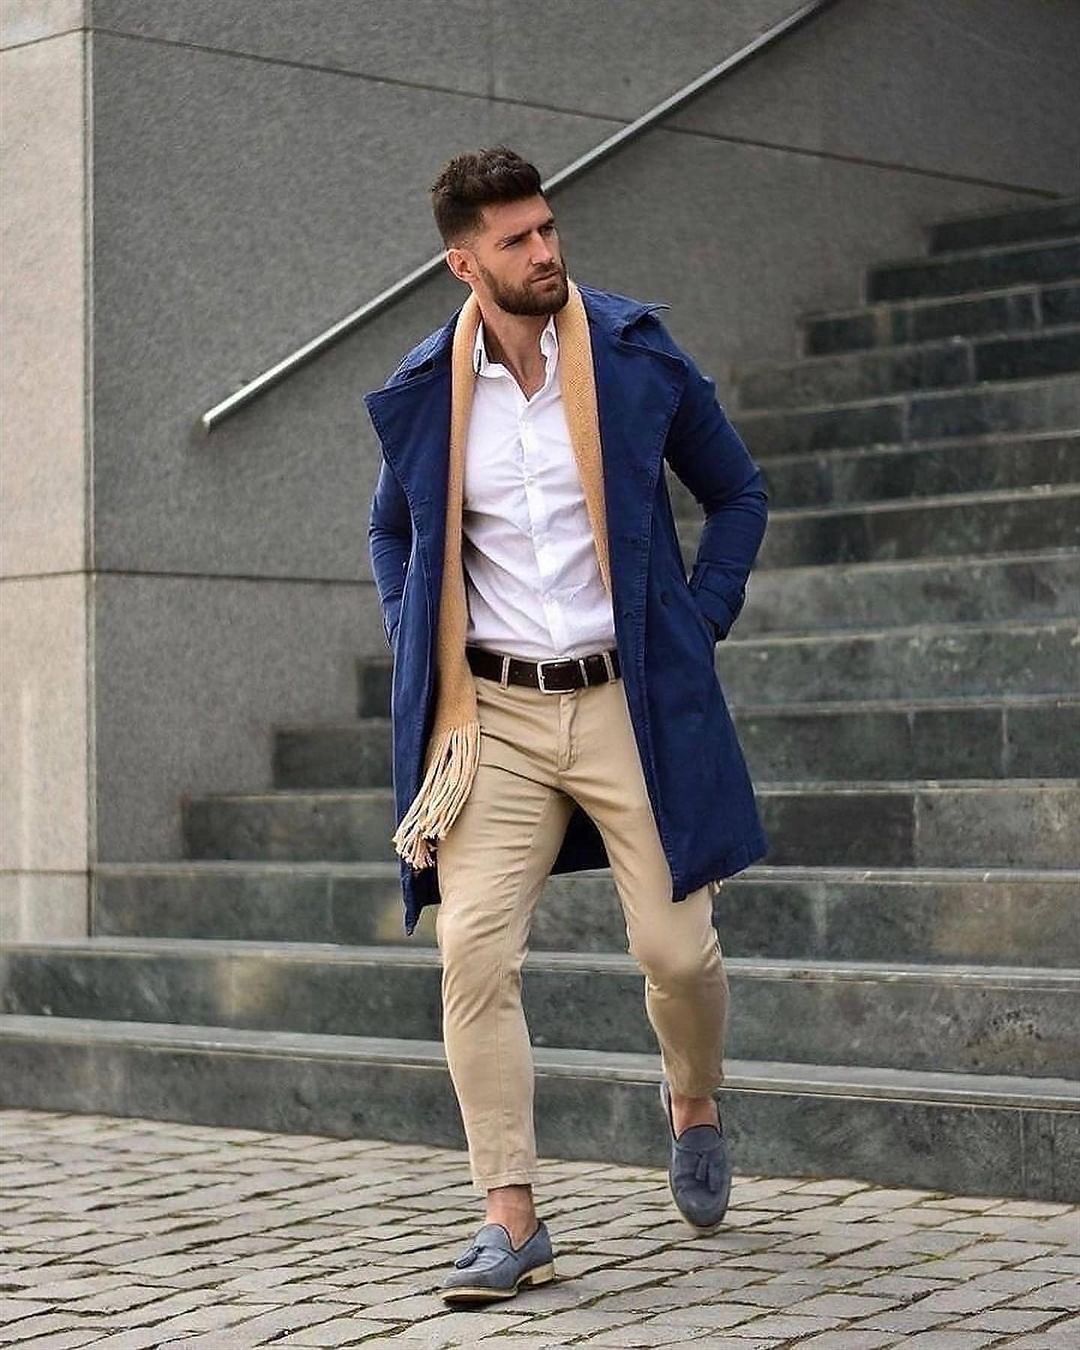 raincoat outfits for men